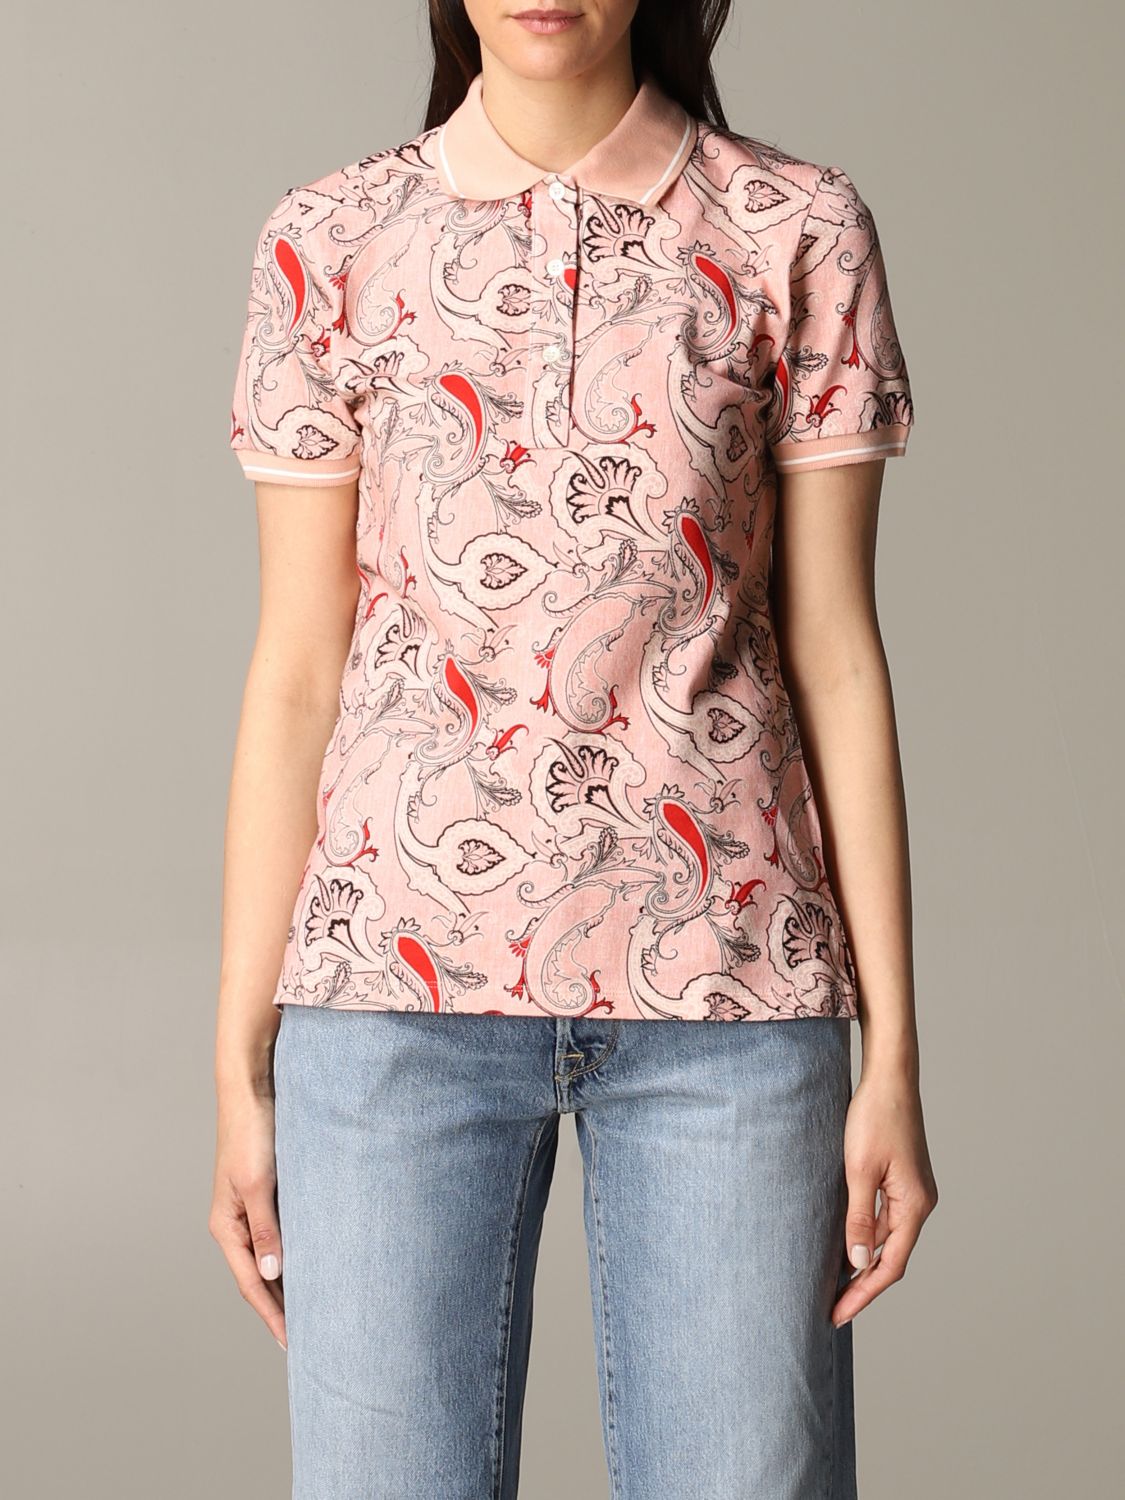 patterned polo shirts womens